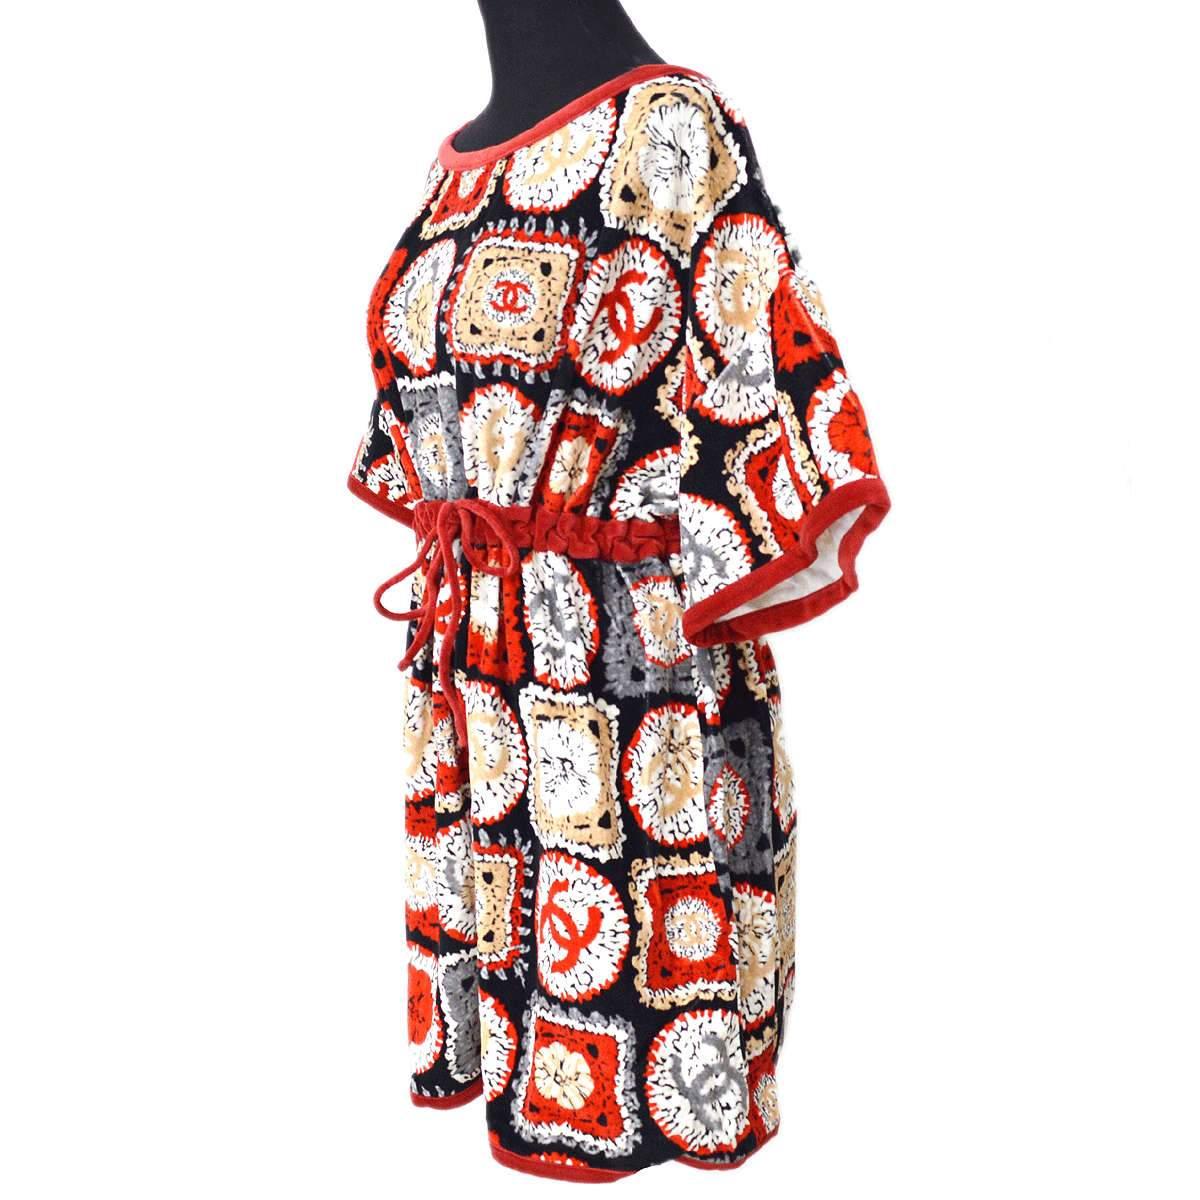 Chanel 2009 Spring Cc Graphic-print Mini Dress #44 in Red